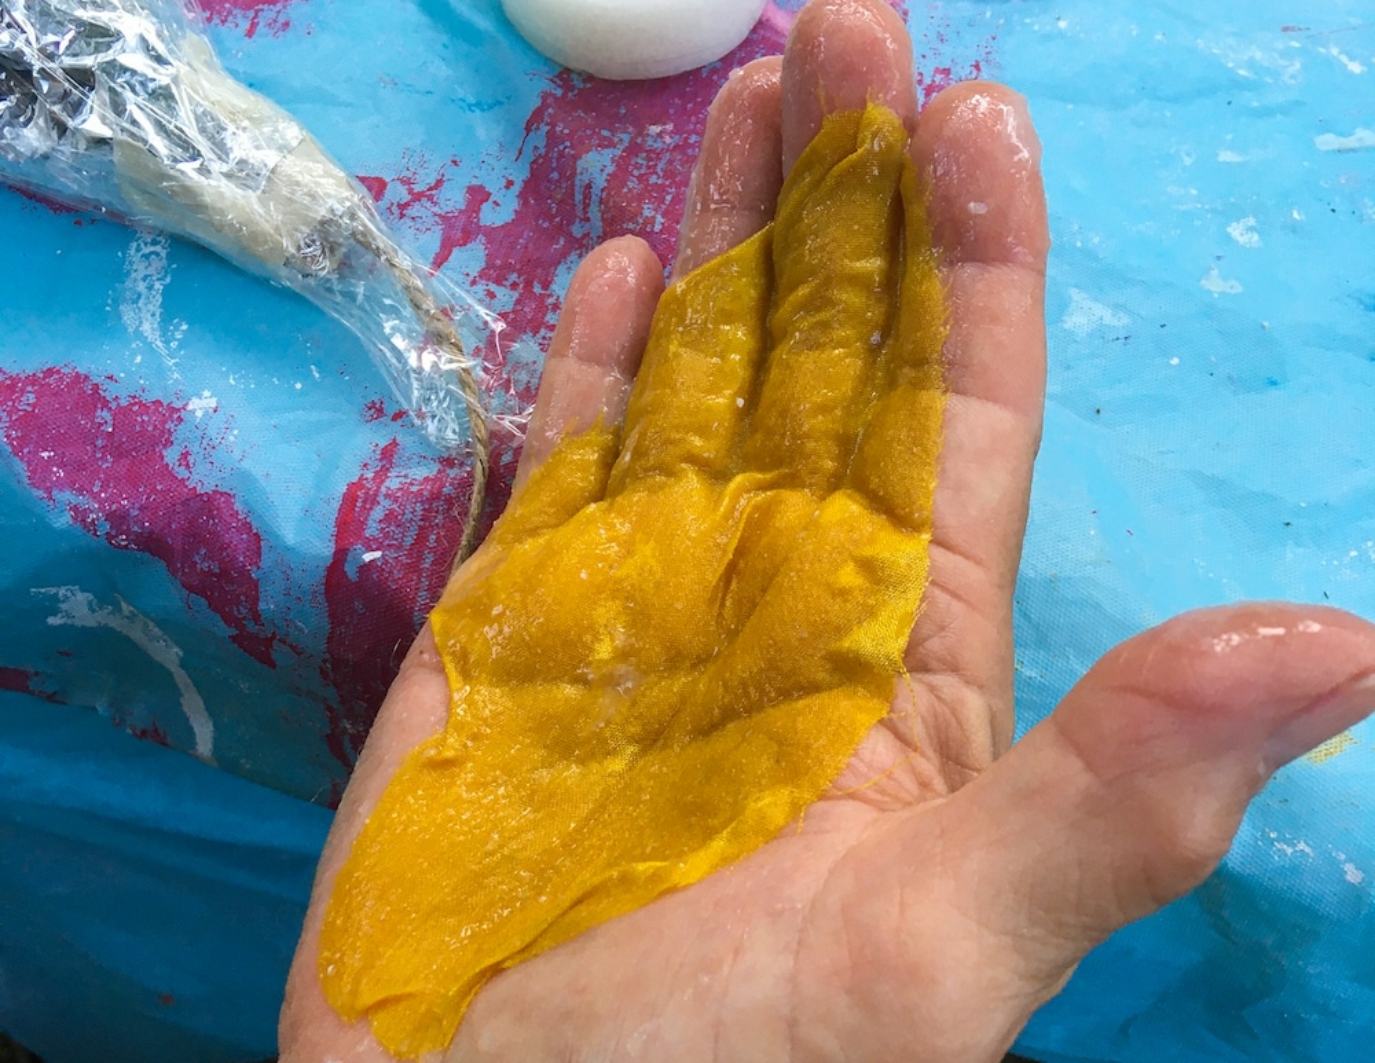 A yellow hand dyed flower is in the right palm of a hand, facing up. The flower is sort of see through, and appears wet, as if just recently dyed. A blue table is the background, with splashes of pink.